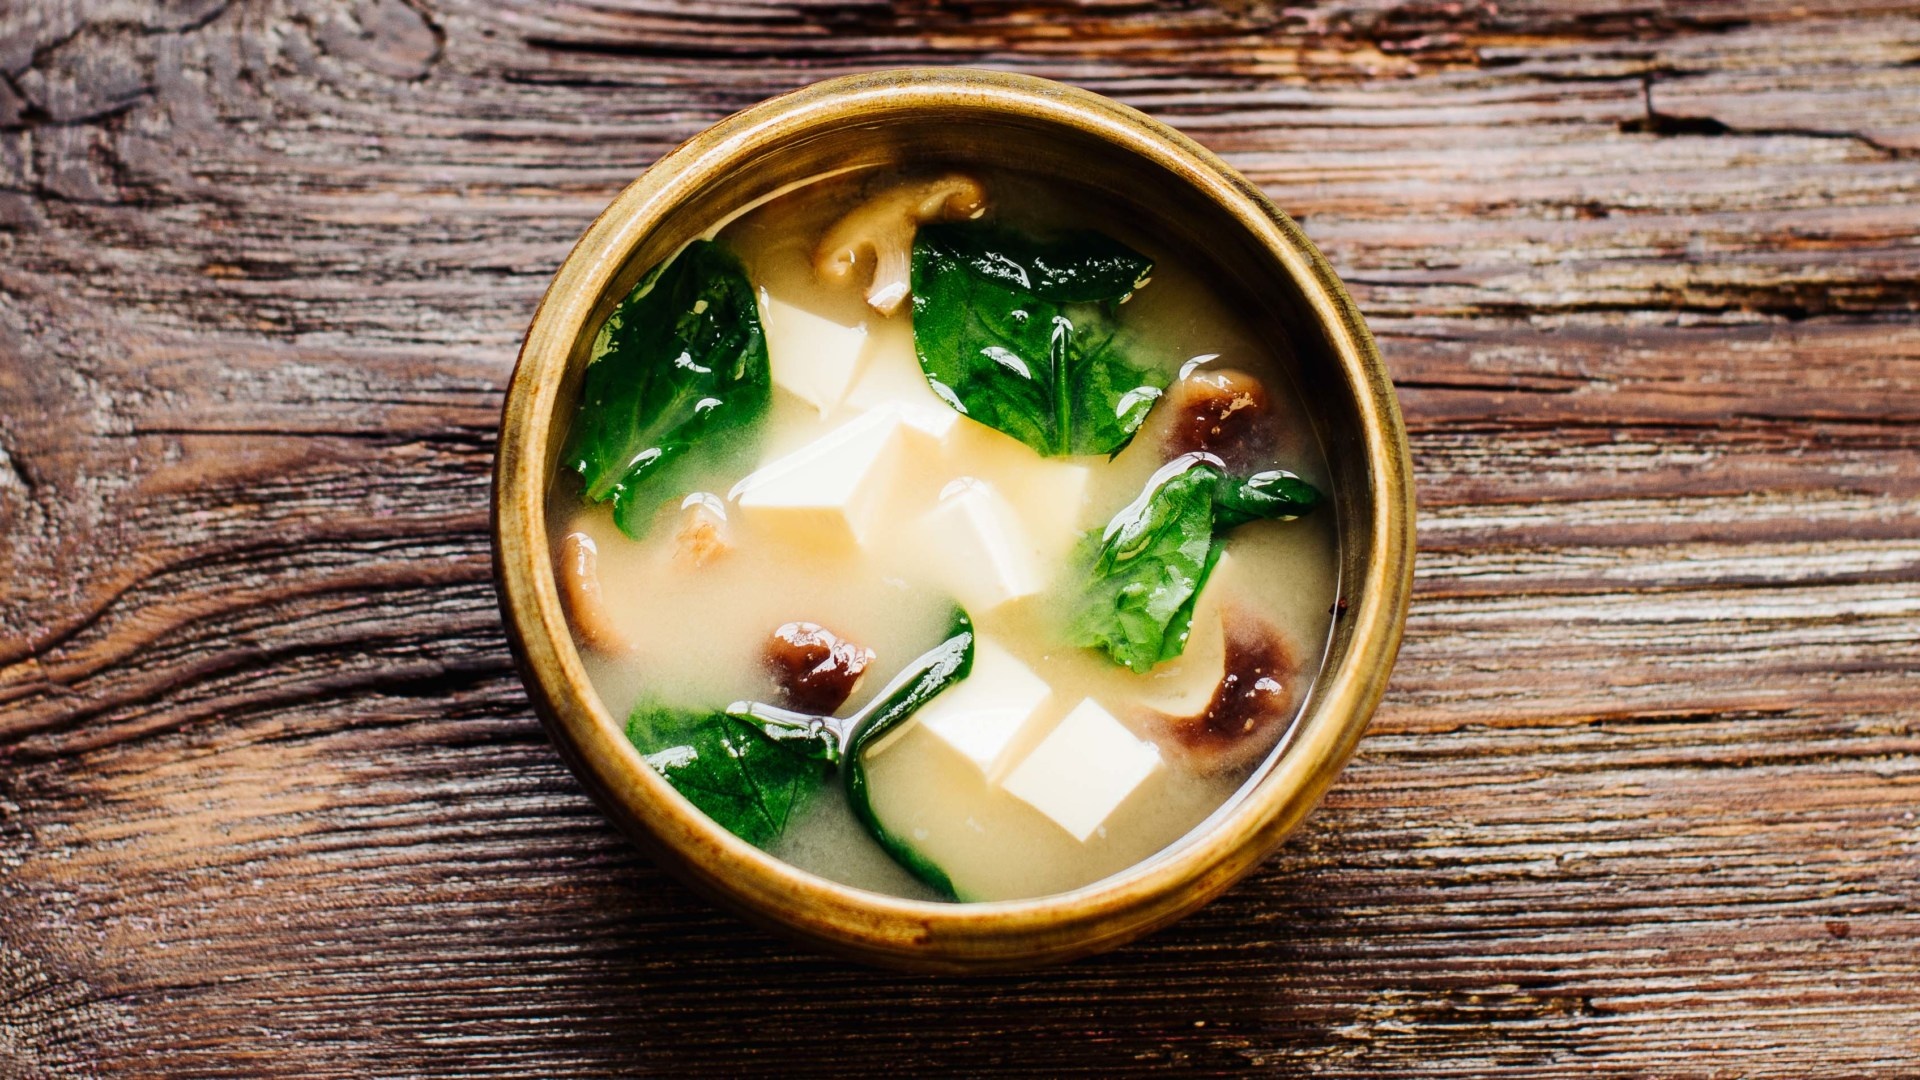 Miso soup with shiitake, Asian street food, Savory flavors, Authentic culinary experience, 1920x1080 Full HD Desktop